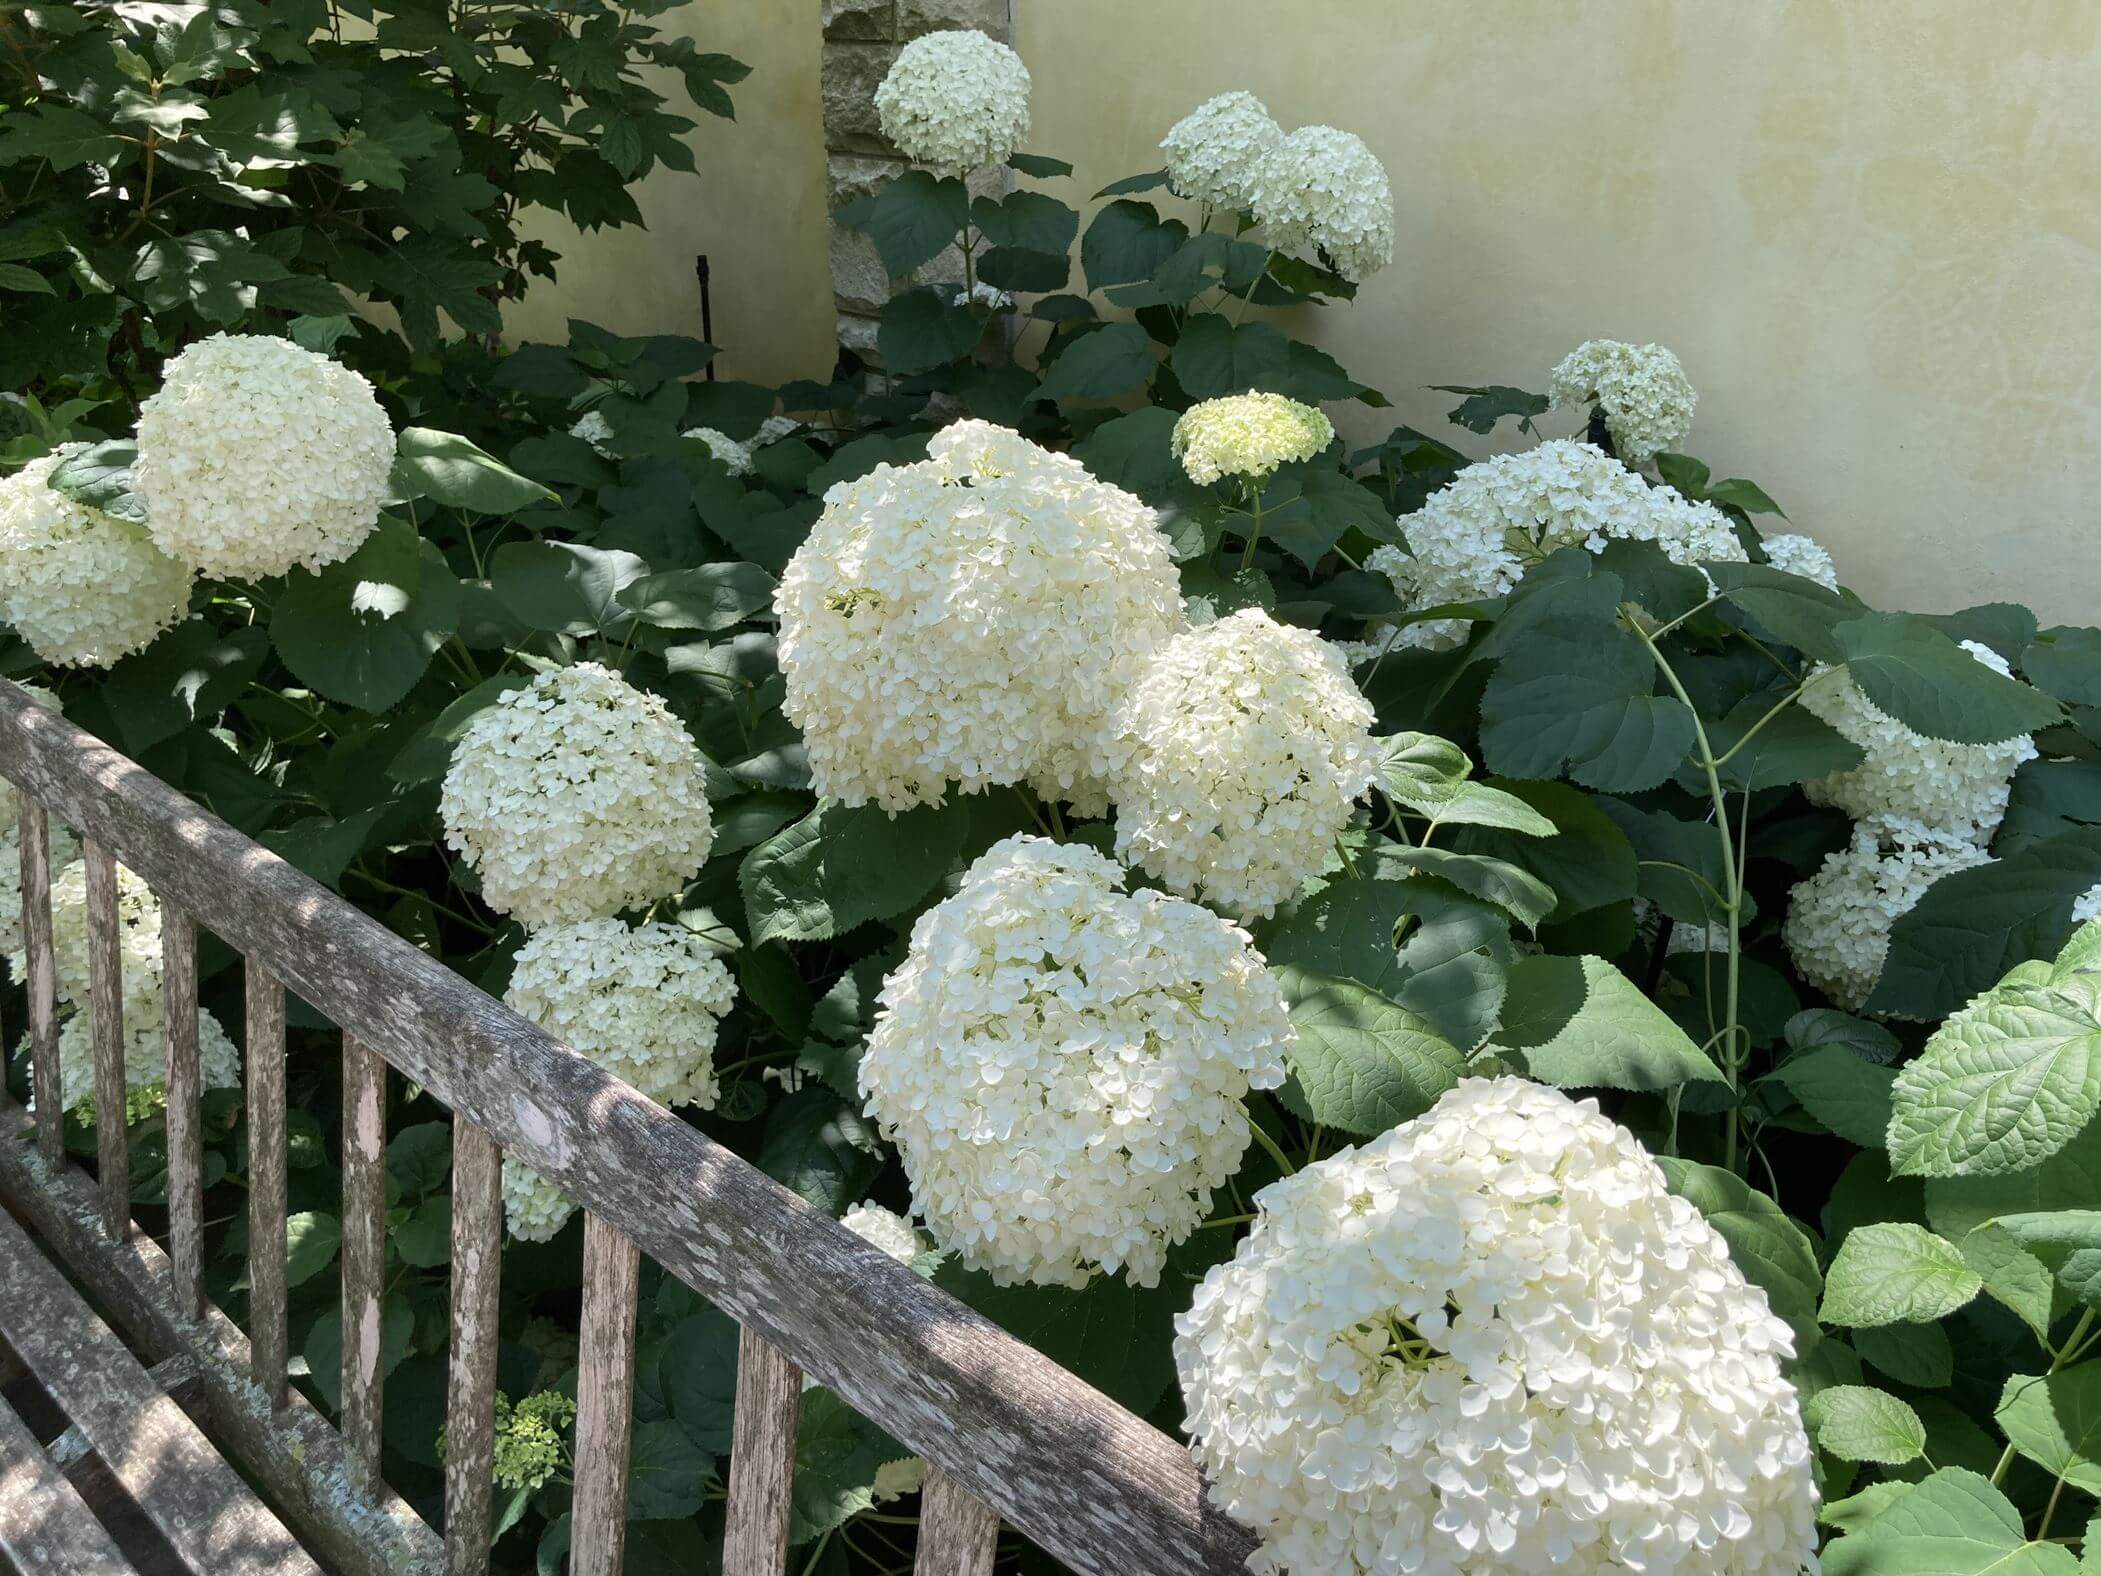 Considered a native of the Eastern U.S., the smooth hydrangea (Hydrangea arborescens) is a showy shrub that sports large, velvety leaves and chartreuse-to-white blooms. (Photo by Sheri Dorn)